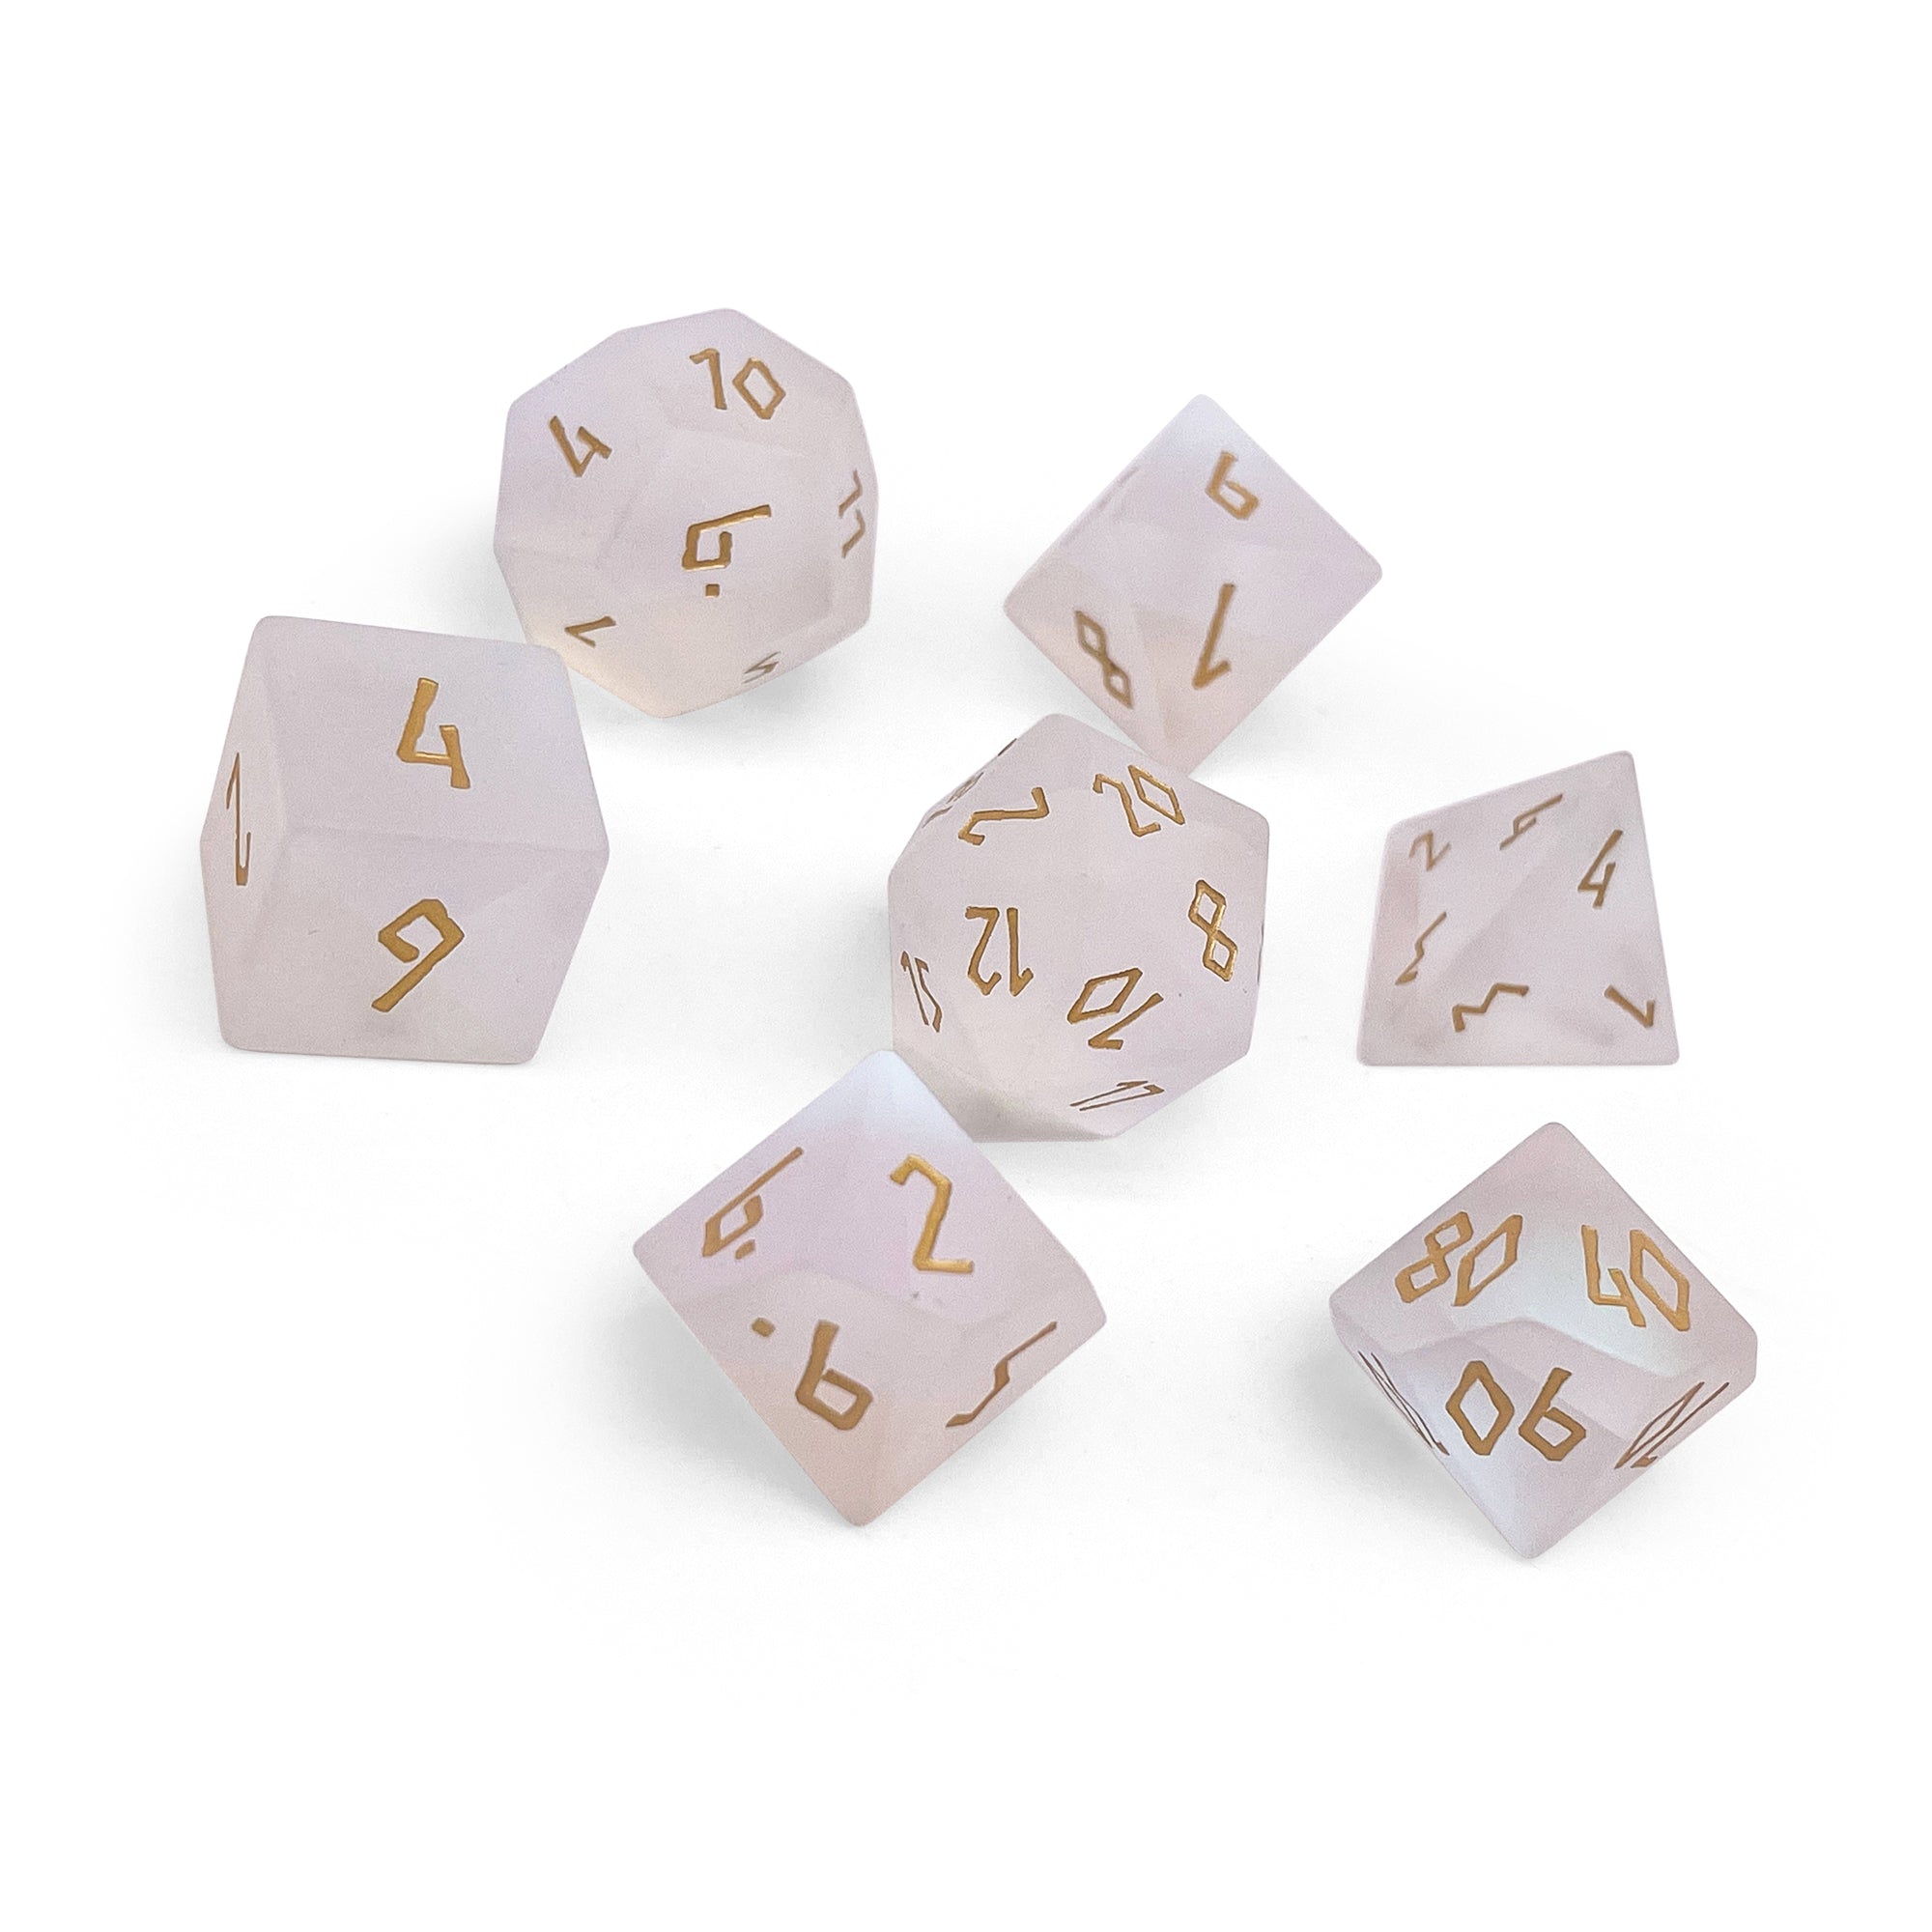 Frosted K9 Rainbow Glass - Gold Font 7 Piece RPG Set K9 Glass Dice